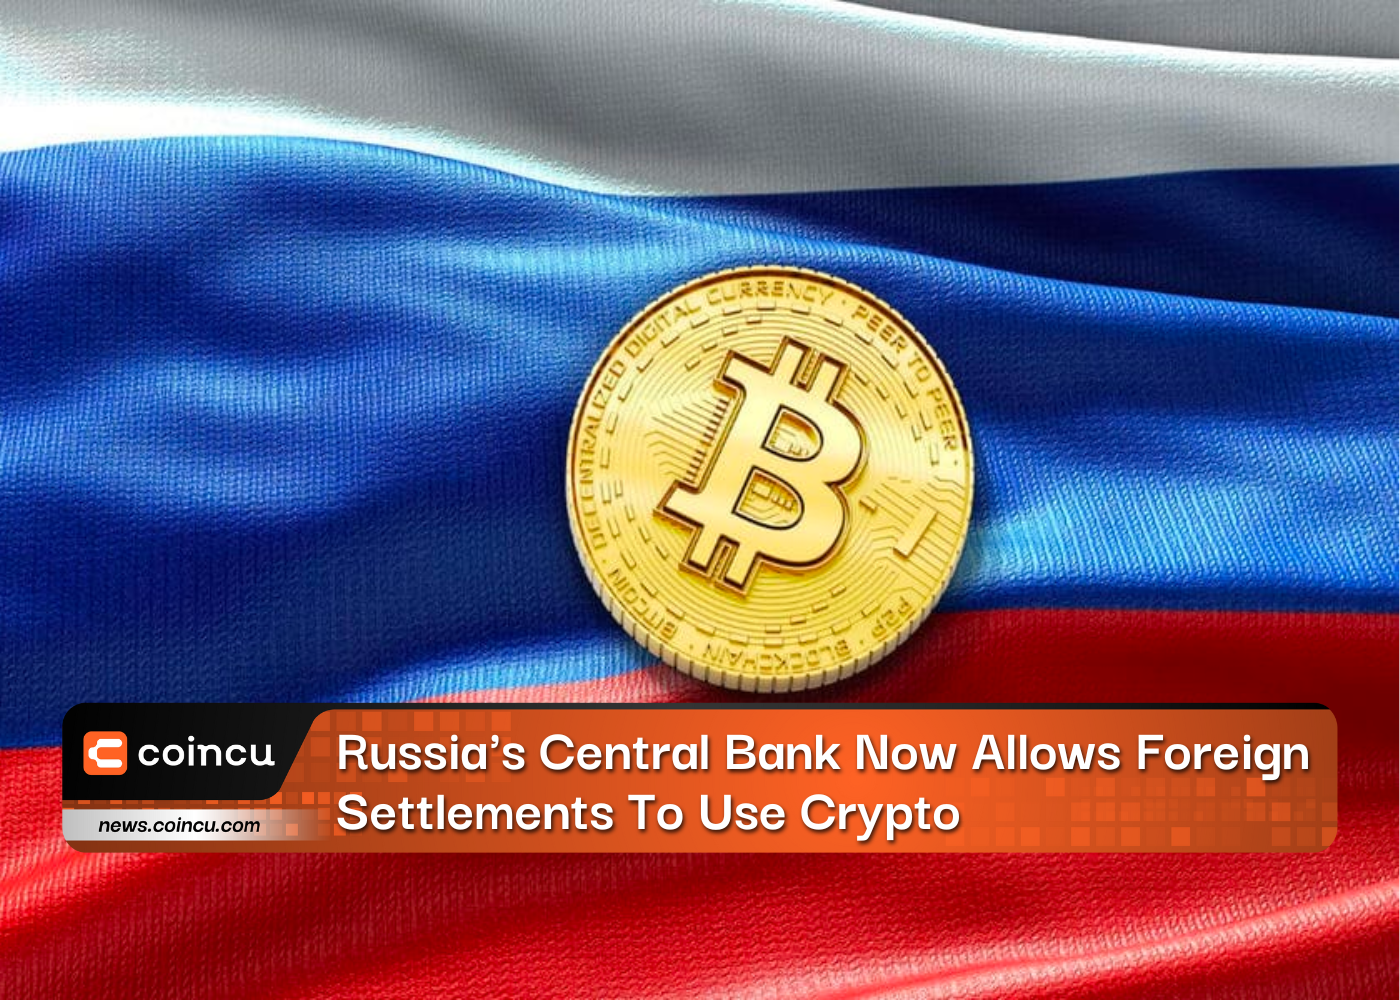 Russia's Central Bank Now Allows Foreign Settlements To Use Crypto